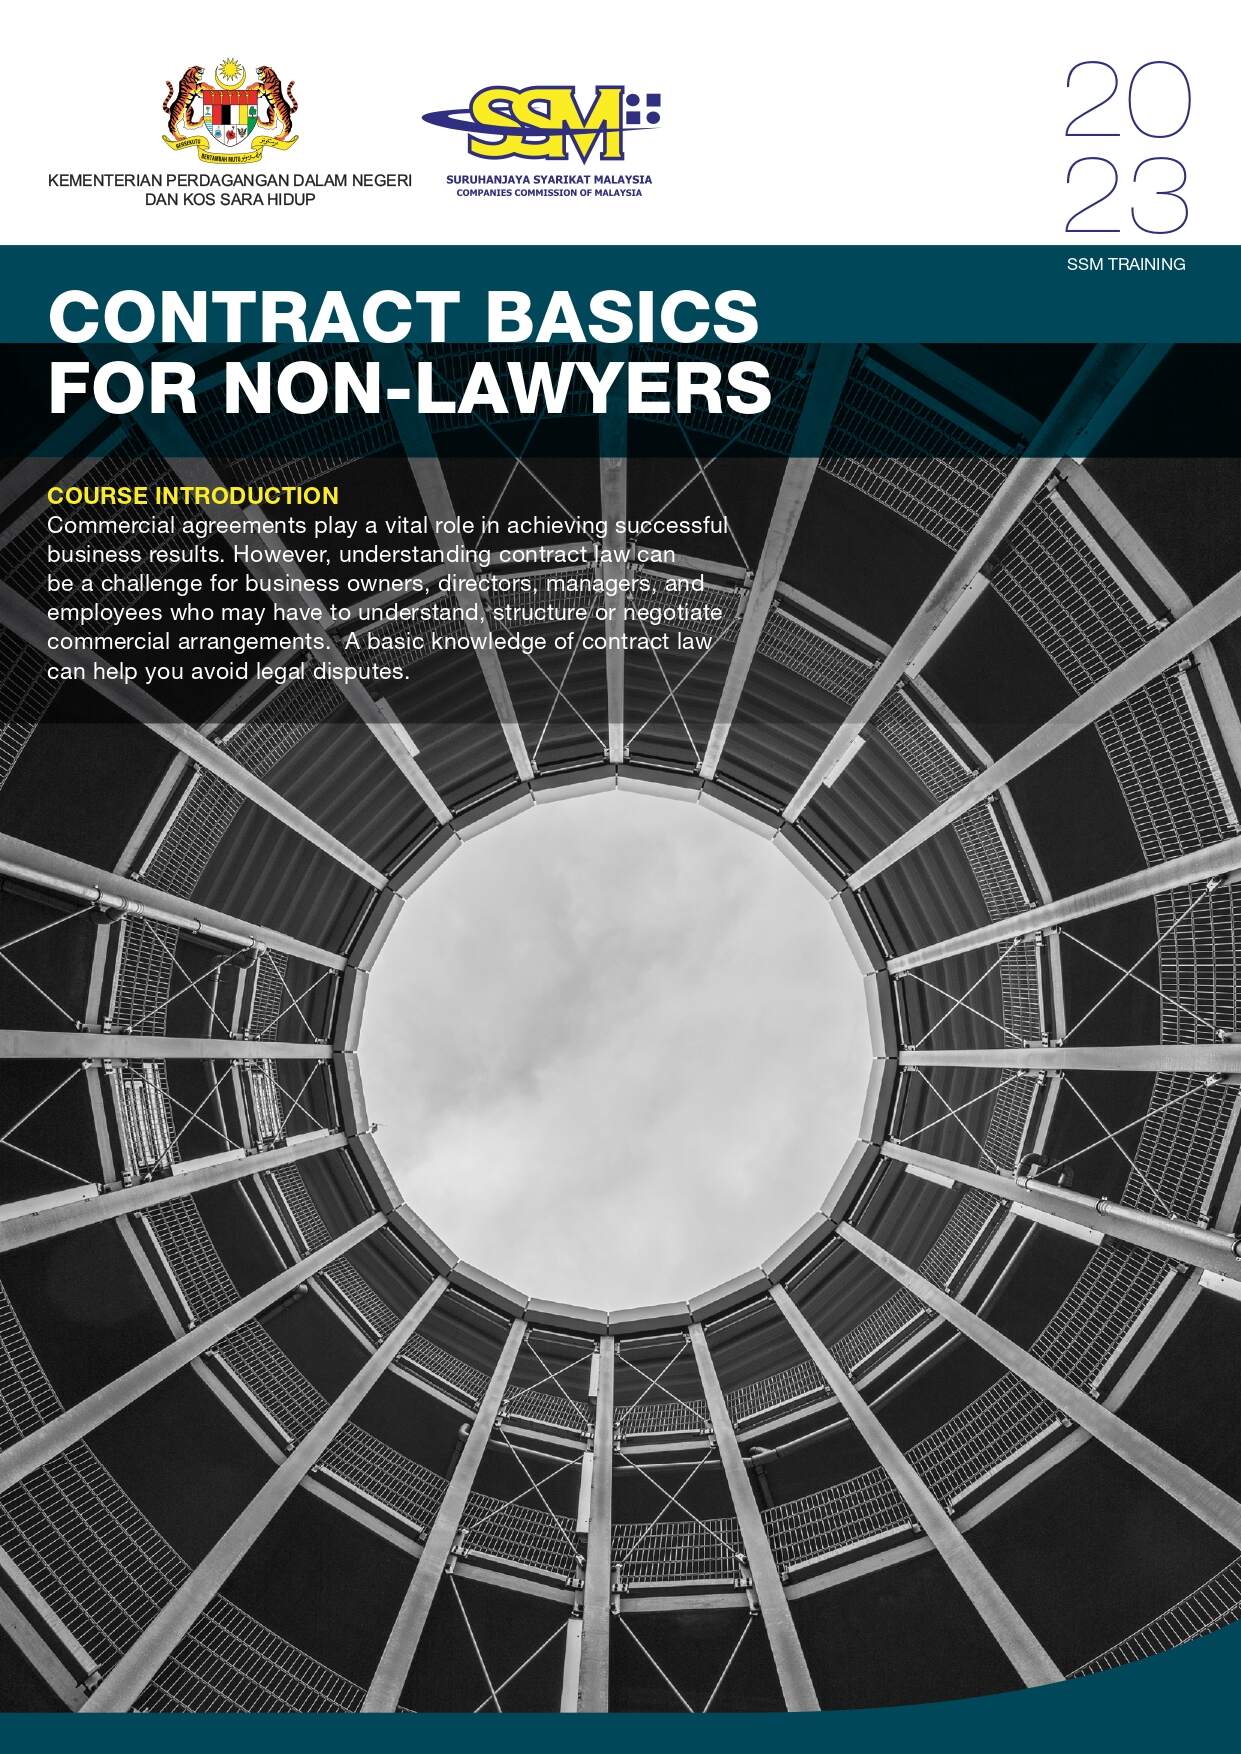 CONTRACT BASICS FOR NON-LAWYERS.jpg